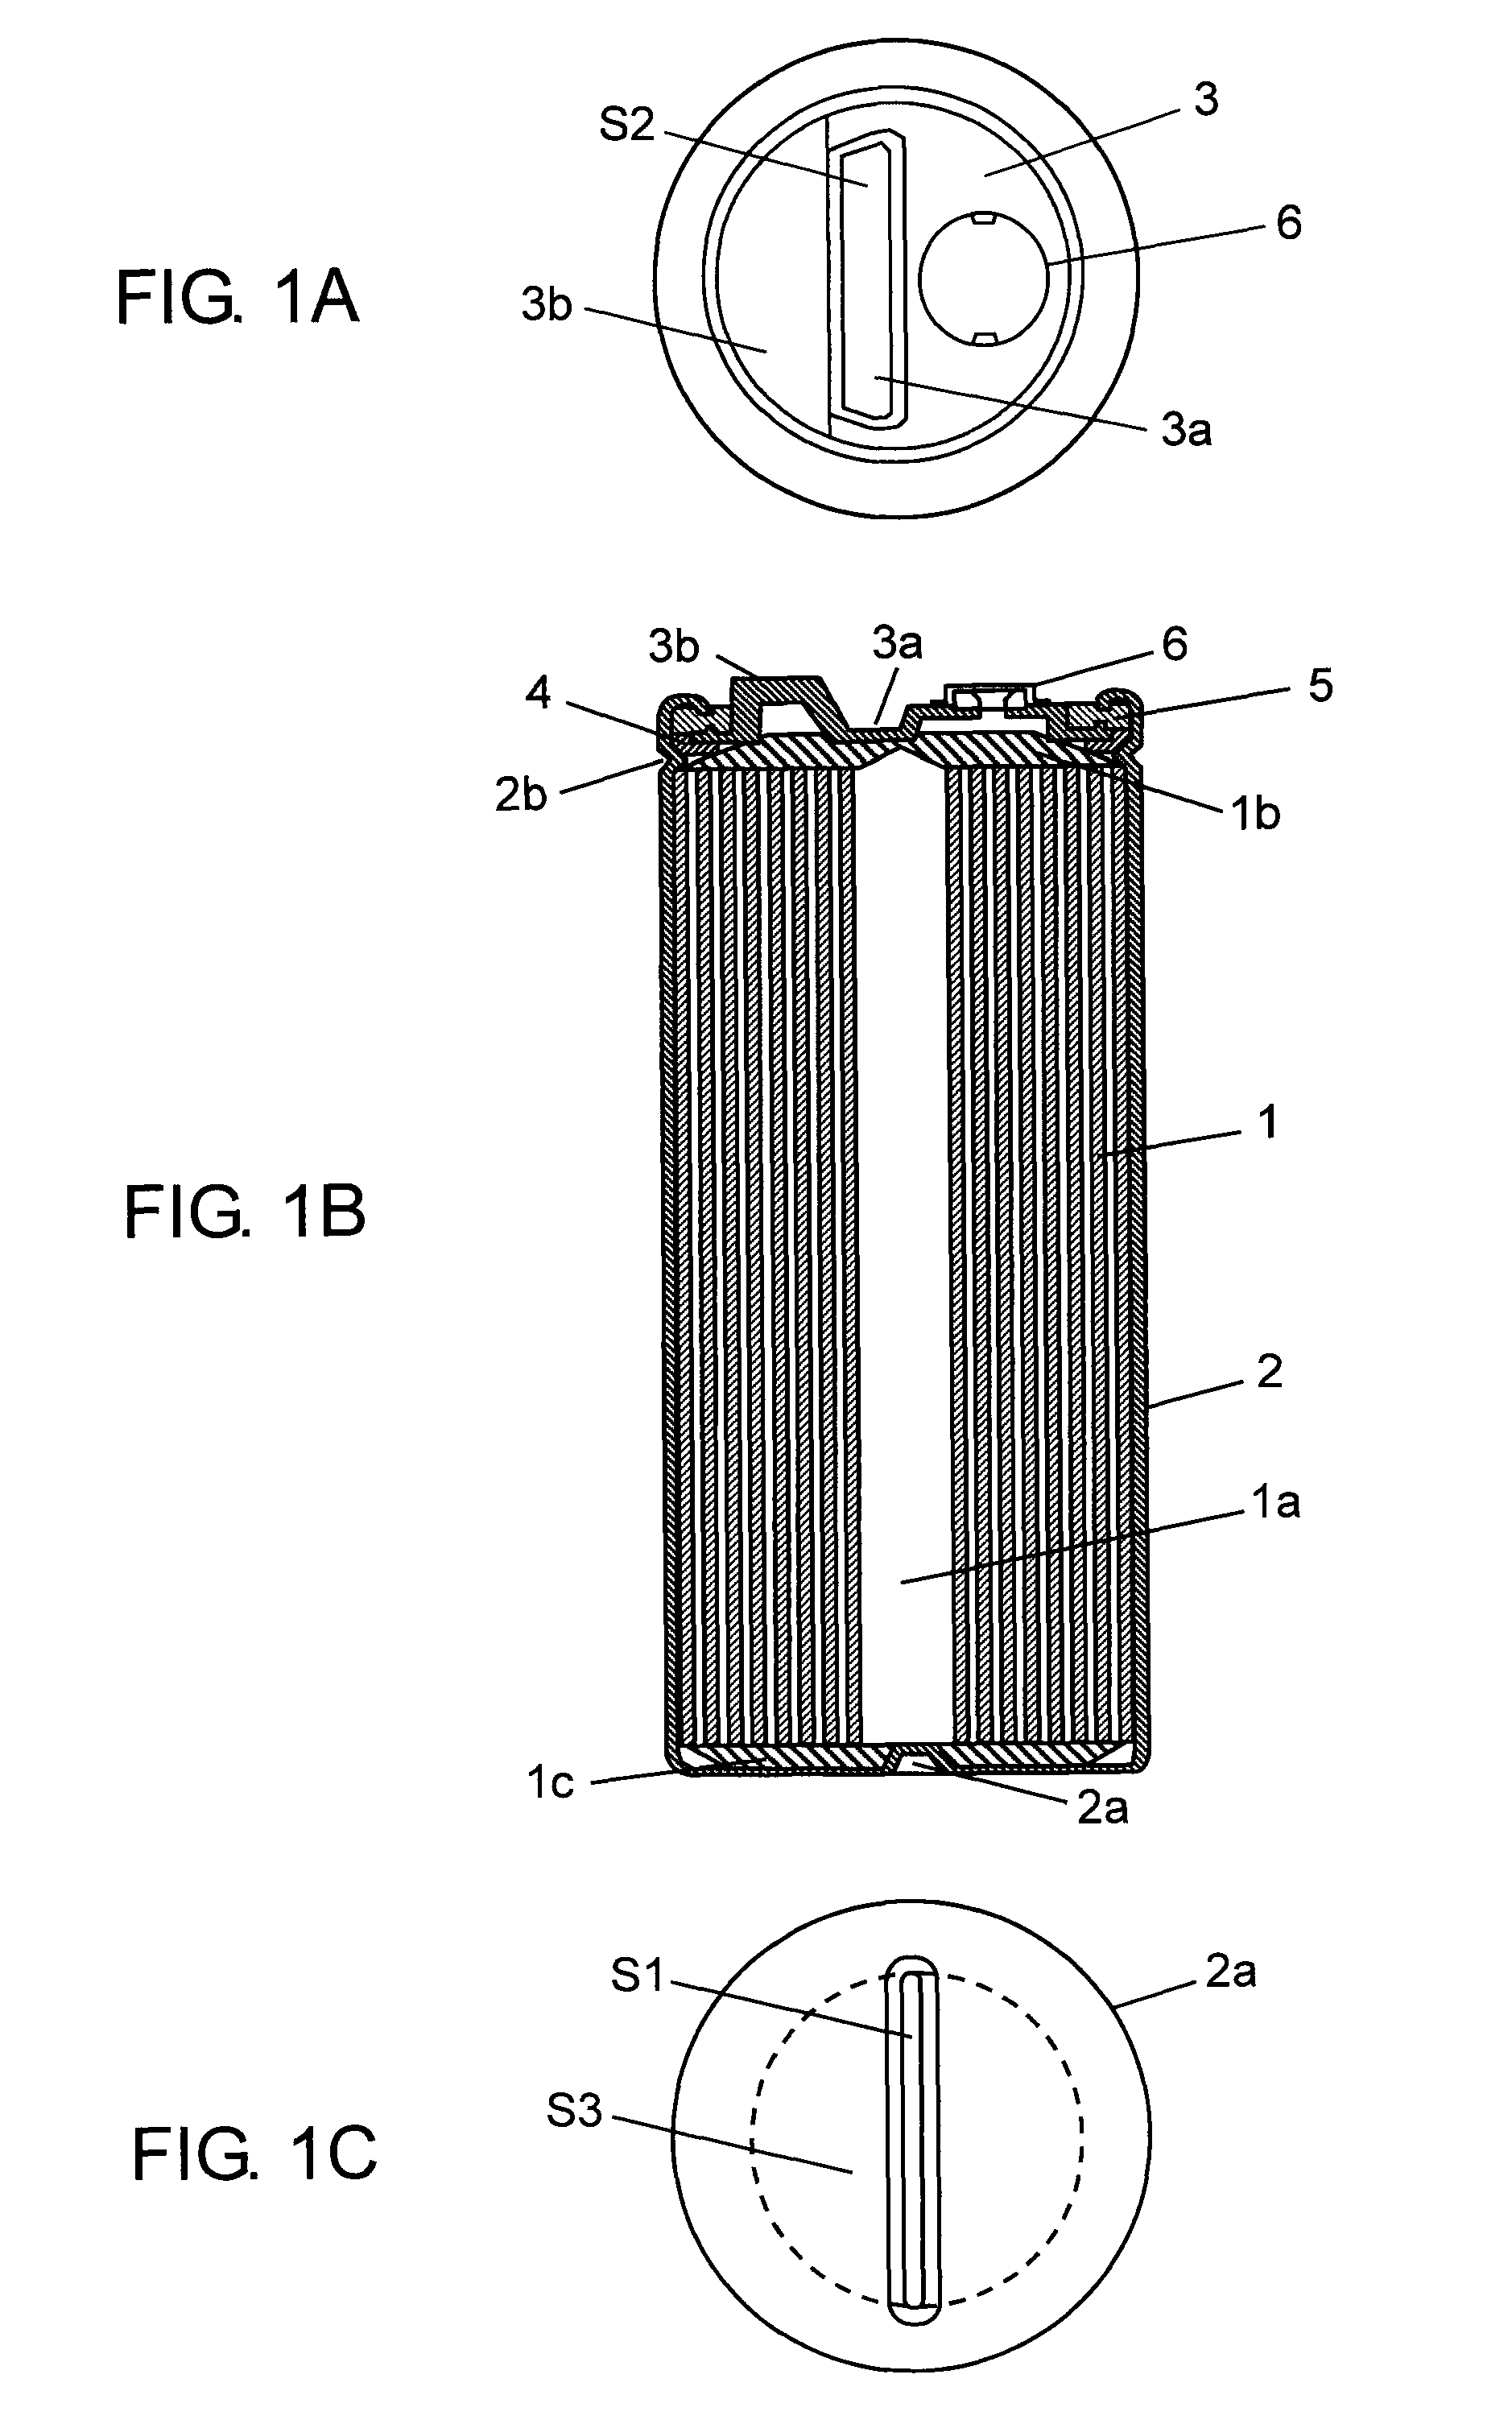 Capacitor with defined terminal plate and housing joint areas